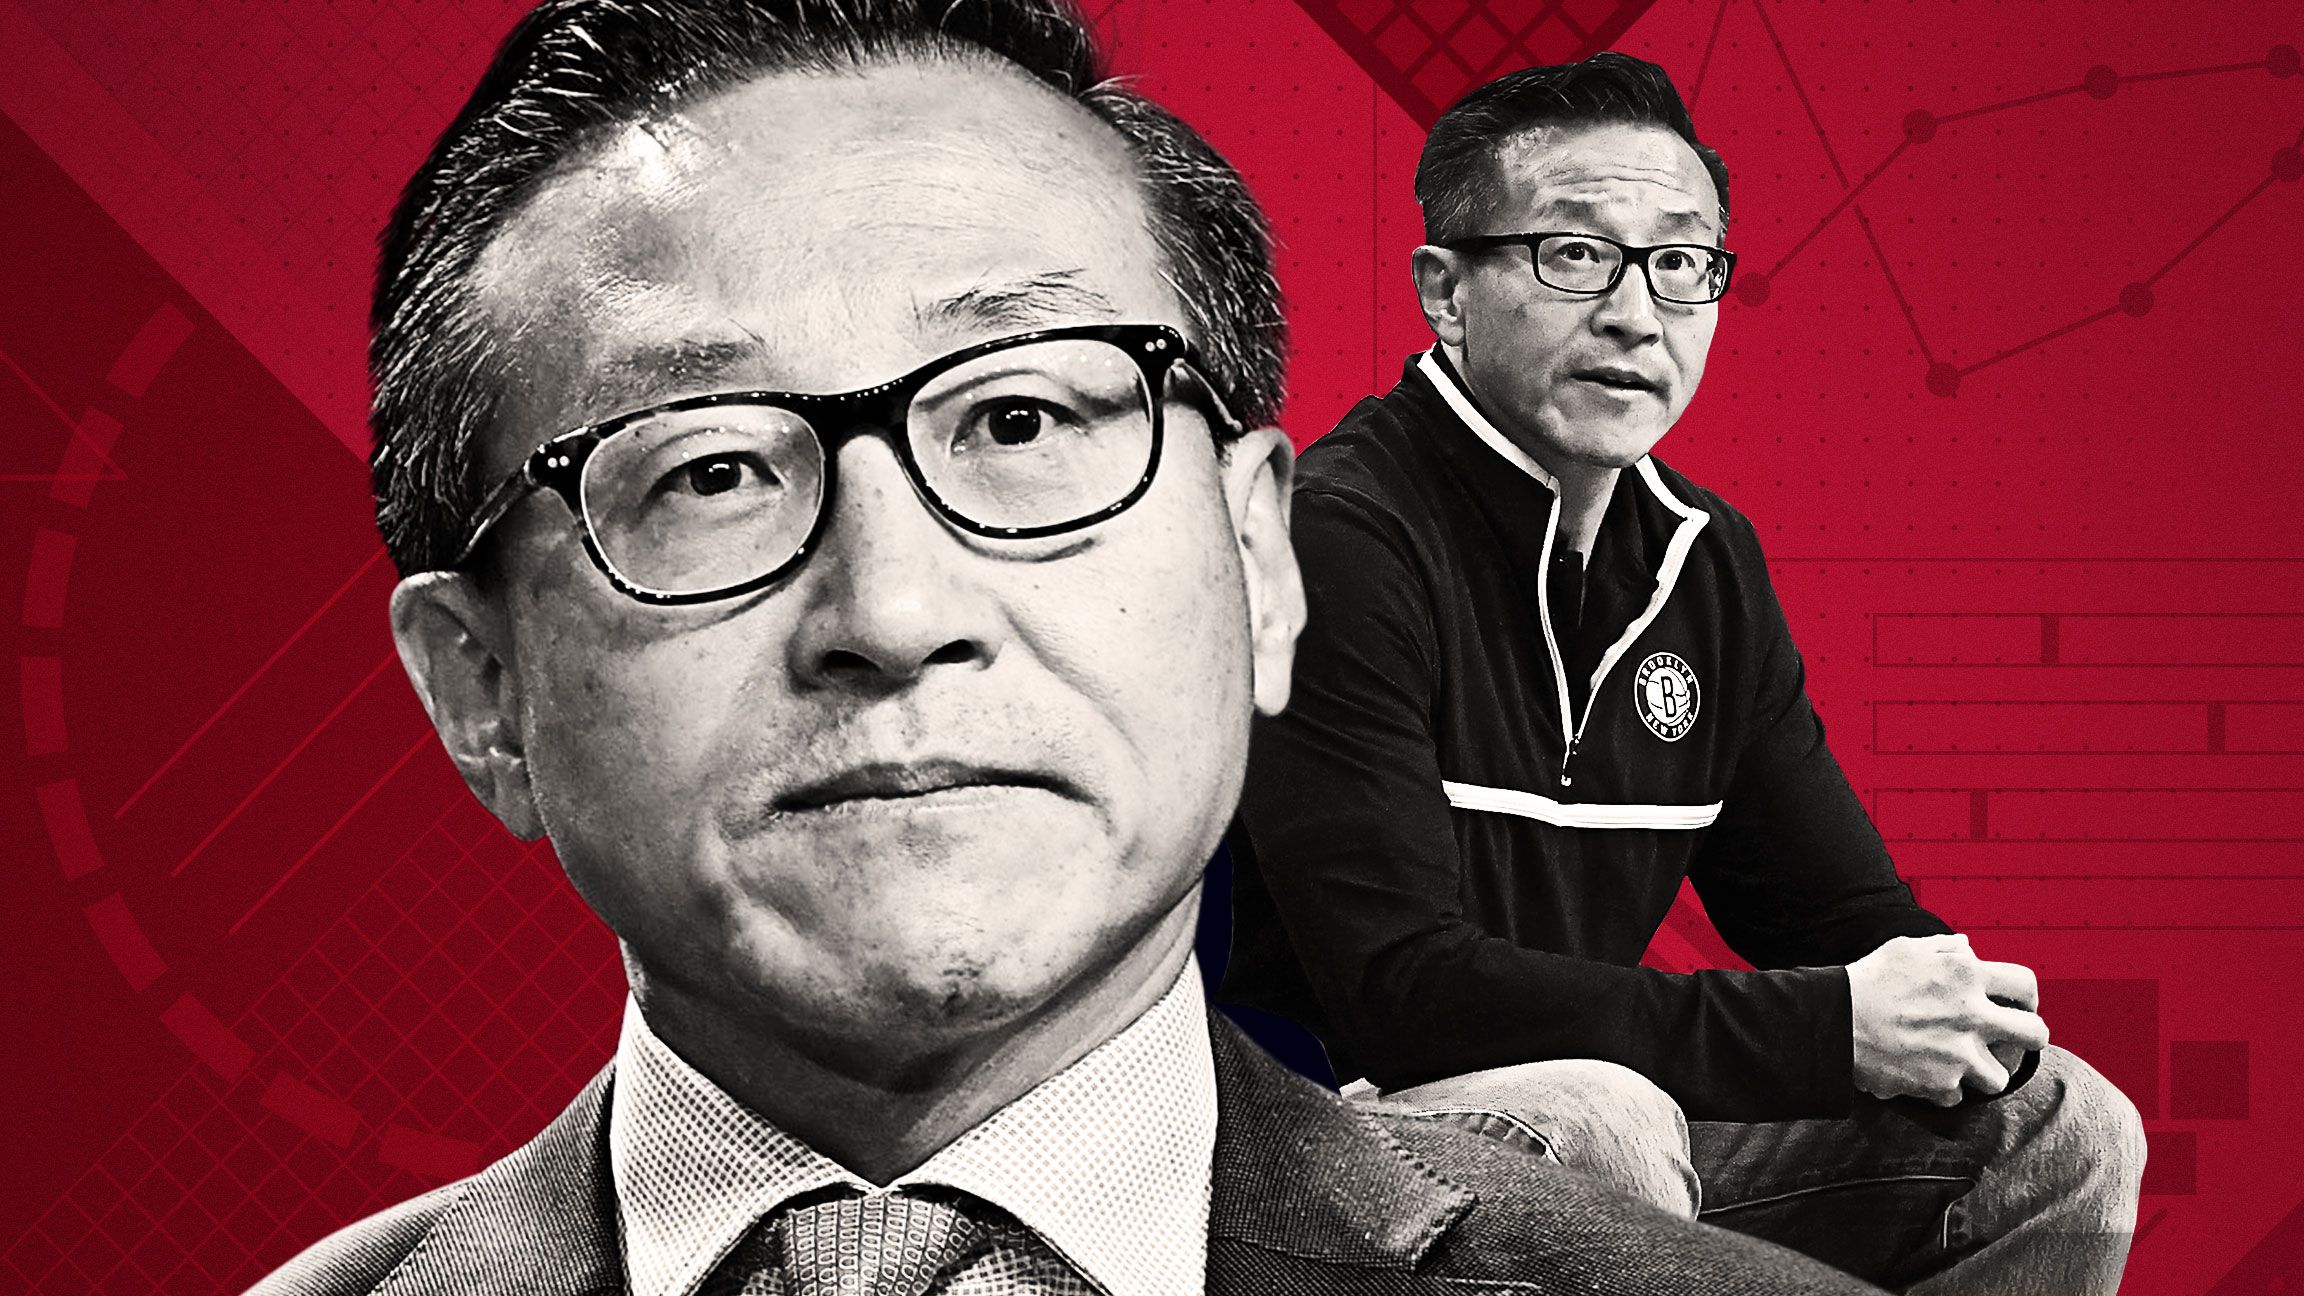 Brooklyn Nets owner Joe Tsai is the face of NBA's uneasy China relationship